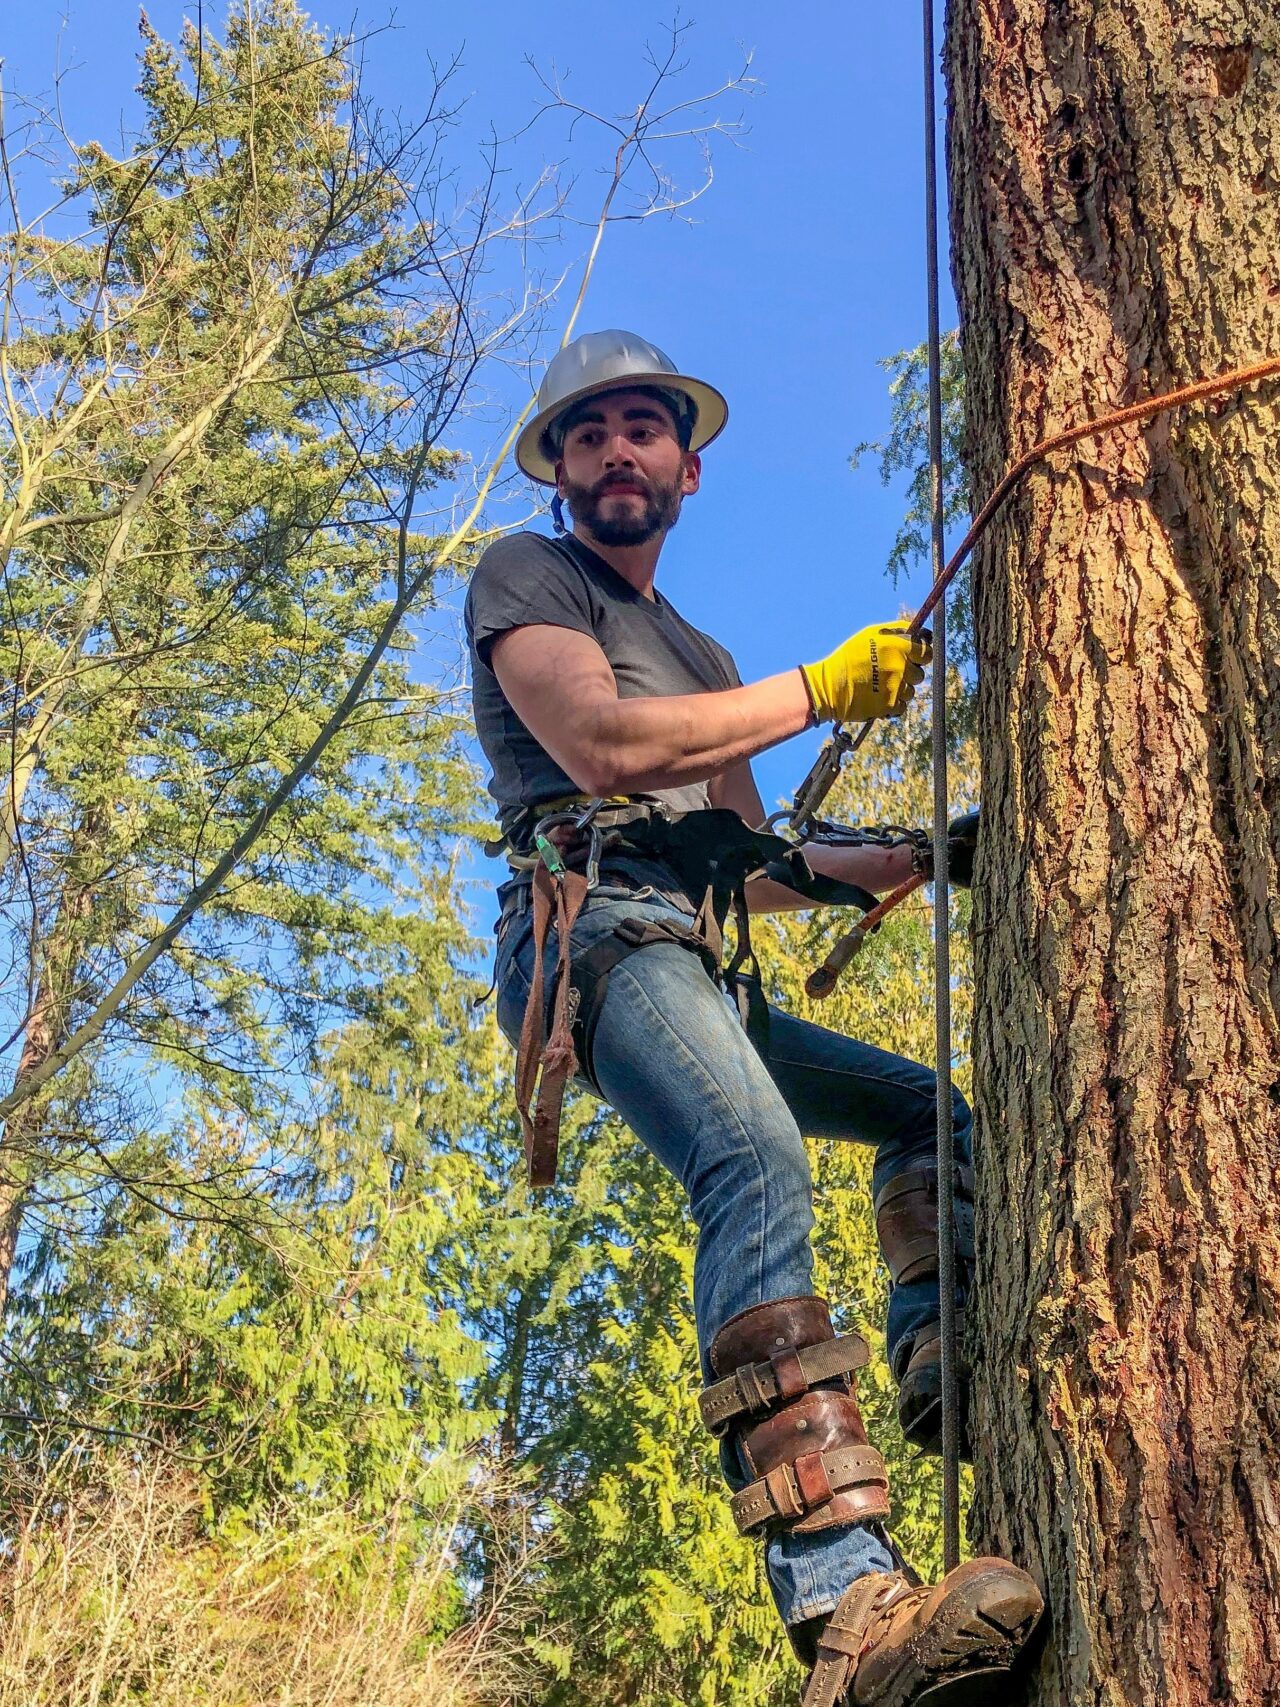 Mike Carey, urban forest program manager for the city of Tacoma, uses American Forests’ Tree Equity Score to help prioritize where to plant the trees that keep communities cool and filter stormwater flowing into Puget Sound.